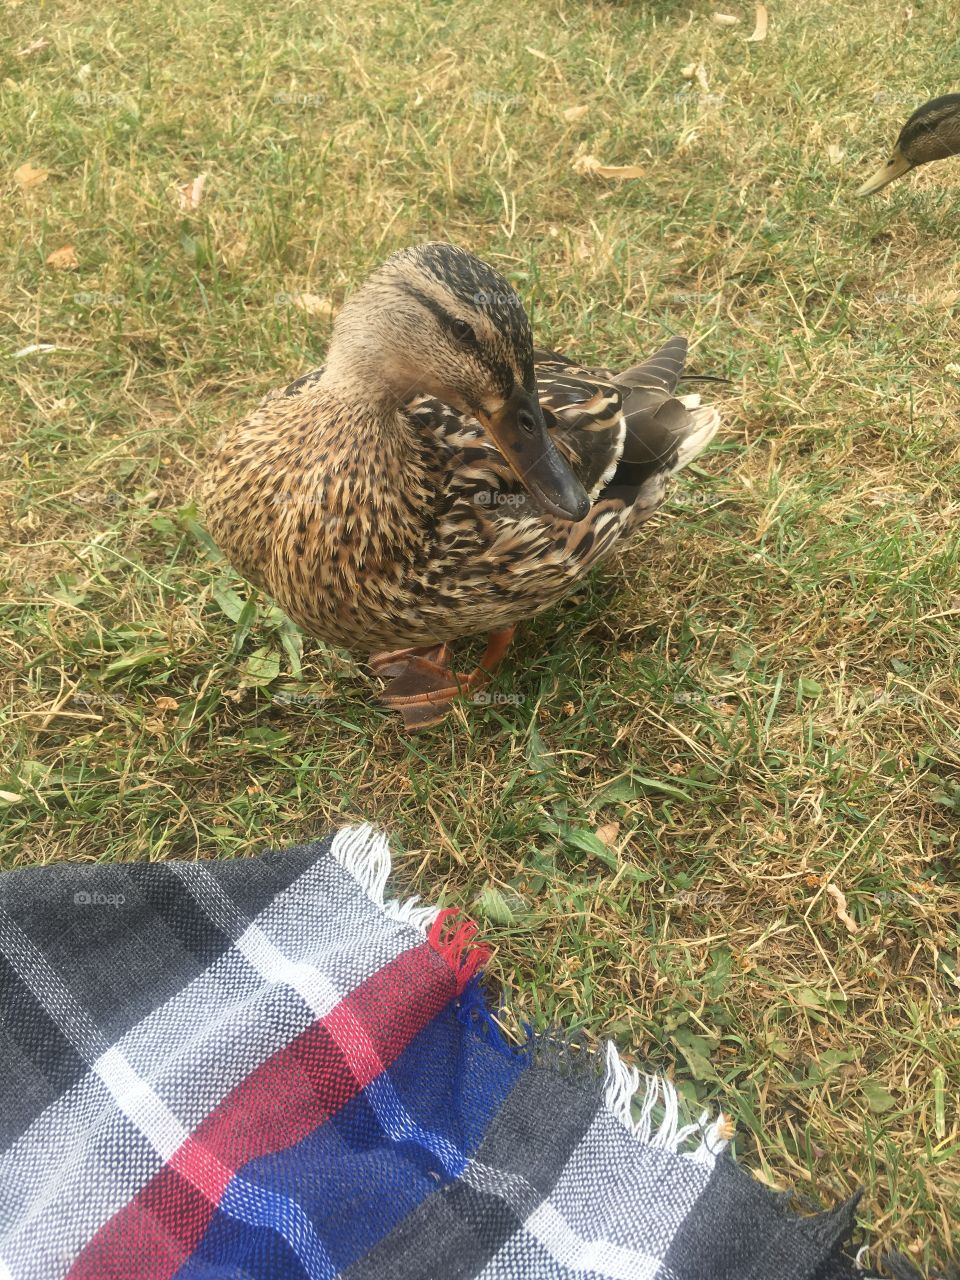 Cute ducks at Oxford Public Parks in England